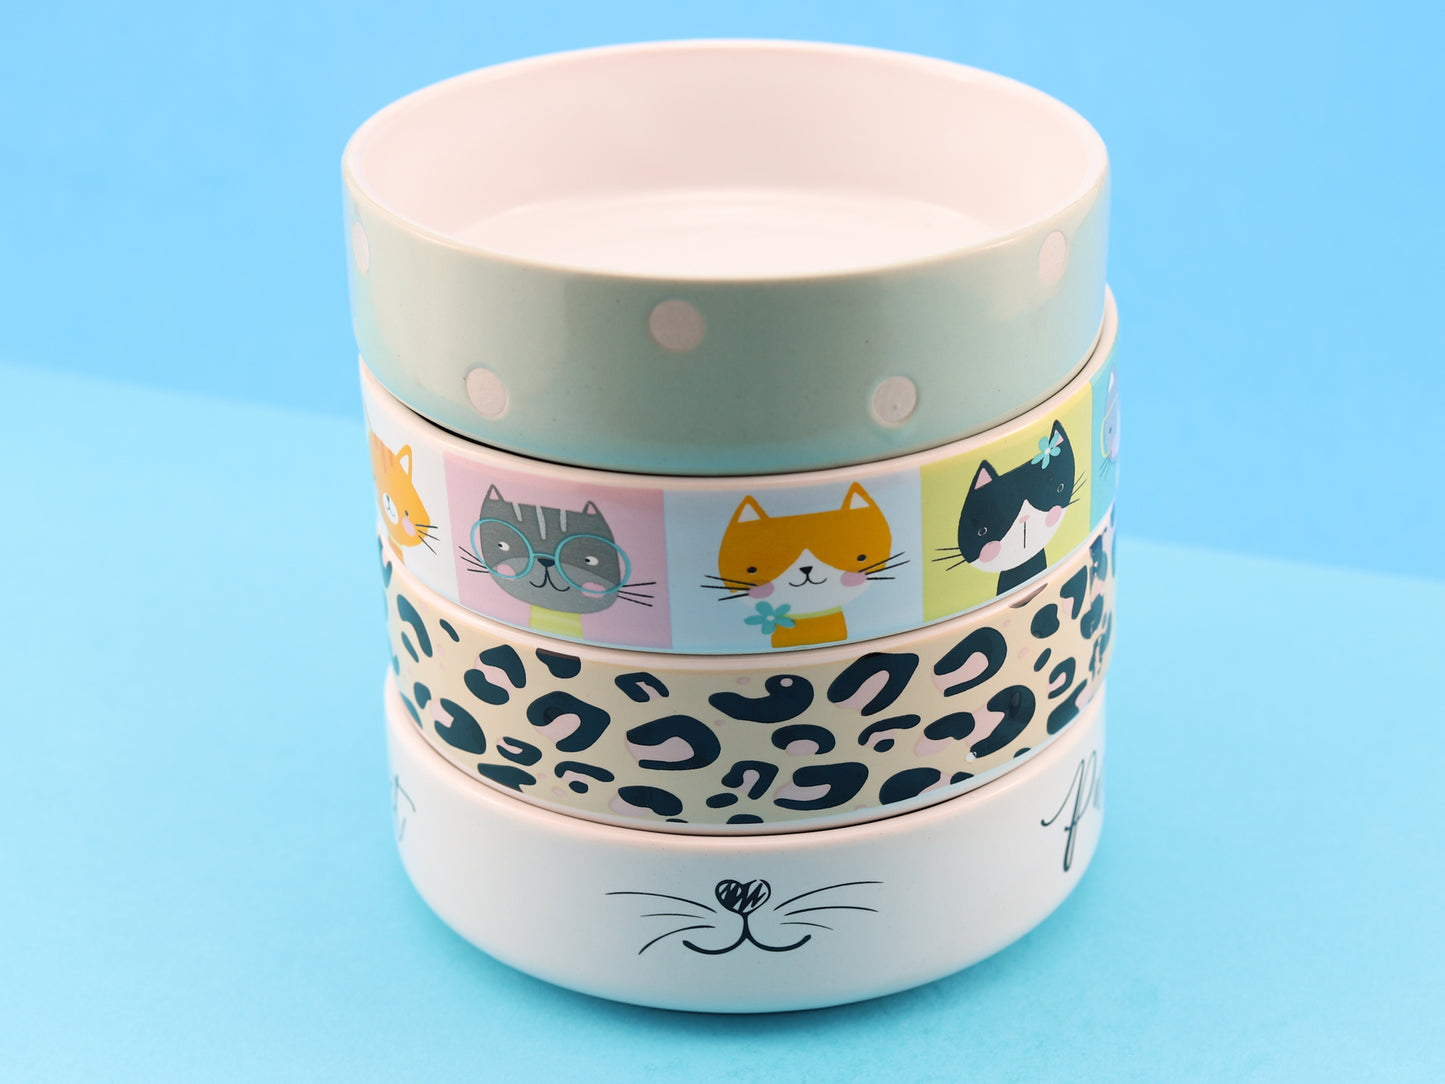 Ceramic cat bowls in four different designs. Sage with polka dots, cute cat portraits, leopard print and white bowl with "purrfect" written on the side with a cat face in the centre of the bowl